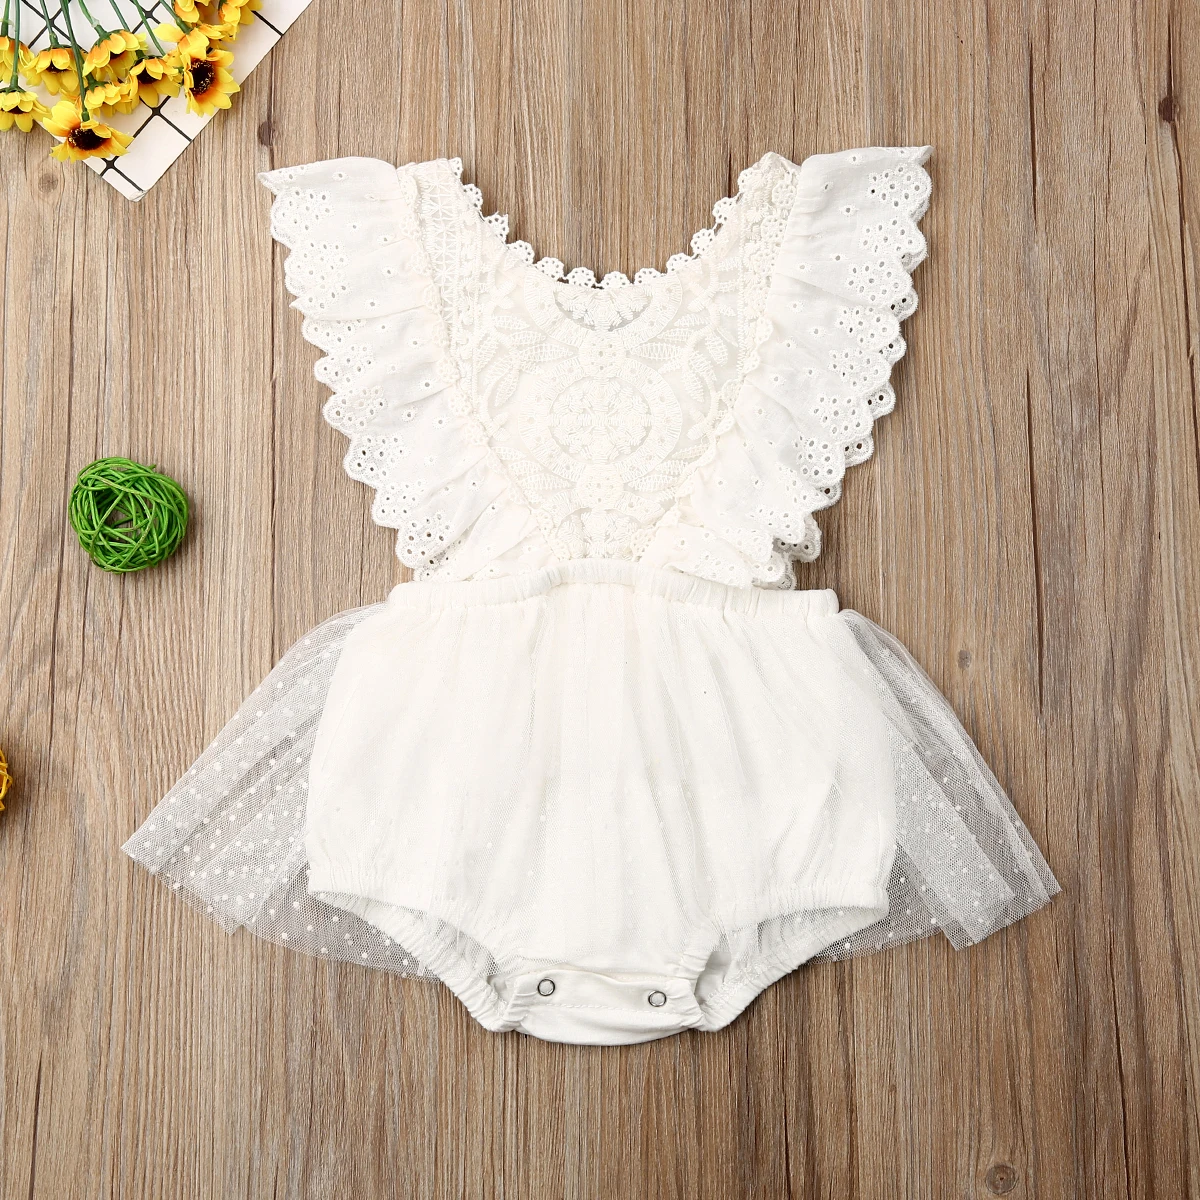 Free Shipping Newborn Baby Long Sleeve Rompers White Lace Flower Ruffle Jumpsuit Bodysuits For Infant Clothing